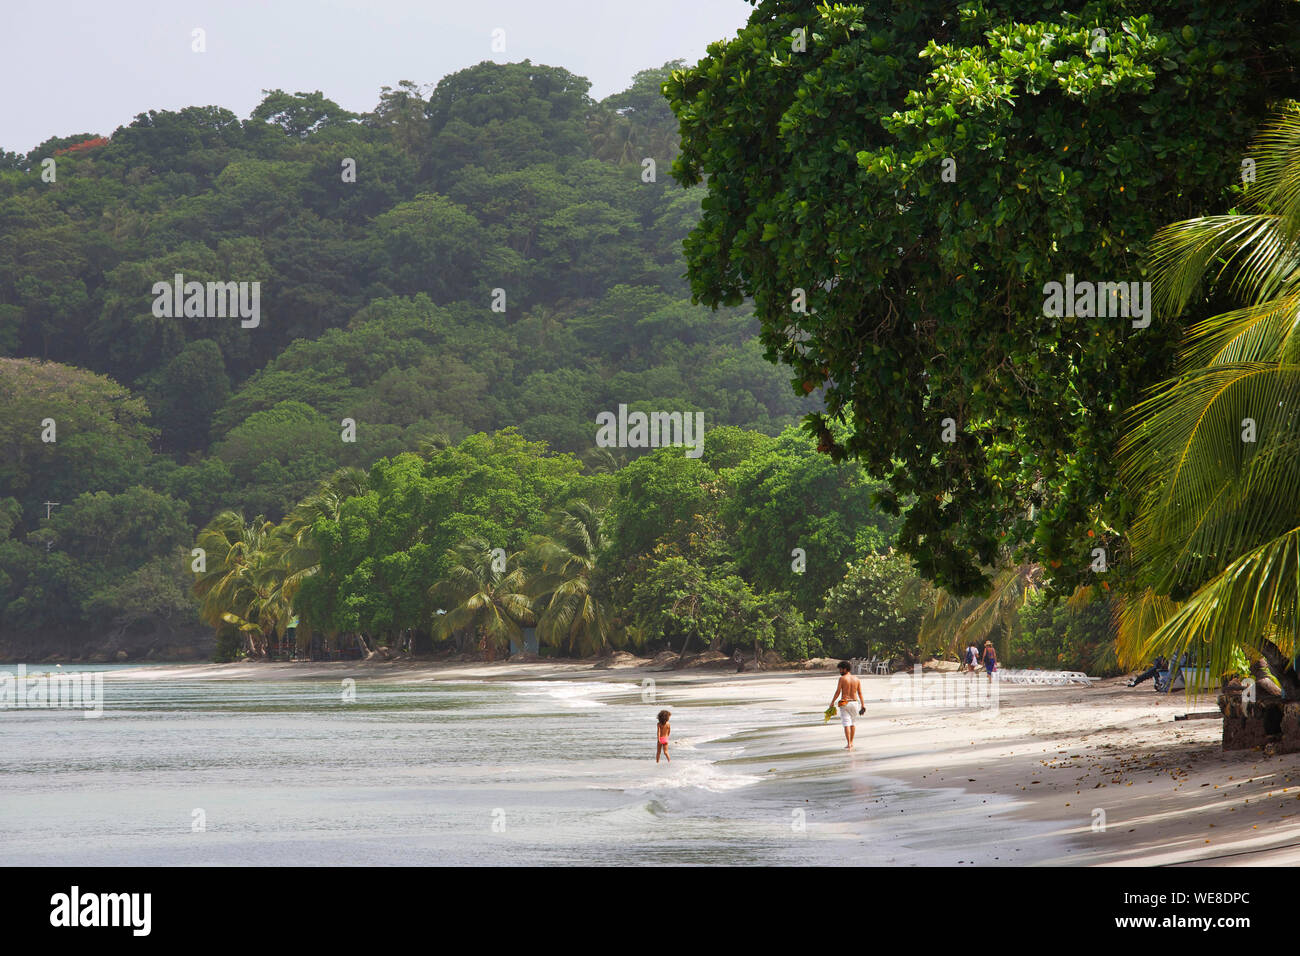 Colombia, Providencia island, Suroeste beach, man and his little daughter walking on the beach of Suroeste surrounded by tropical vegetation and bathed by the caribbean Stock Photo